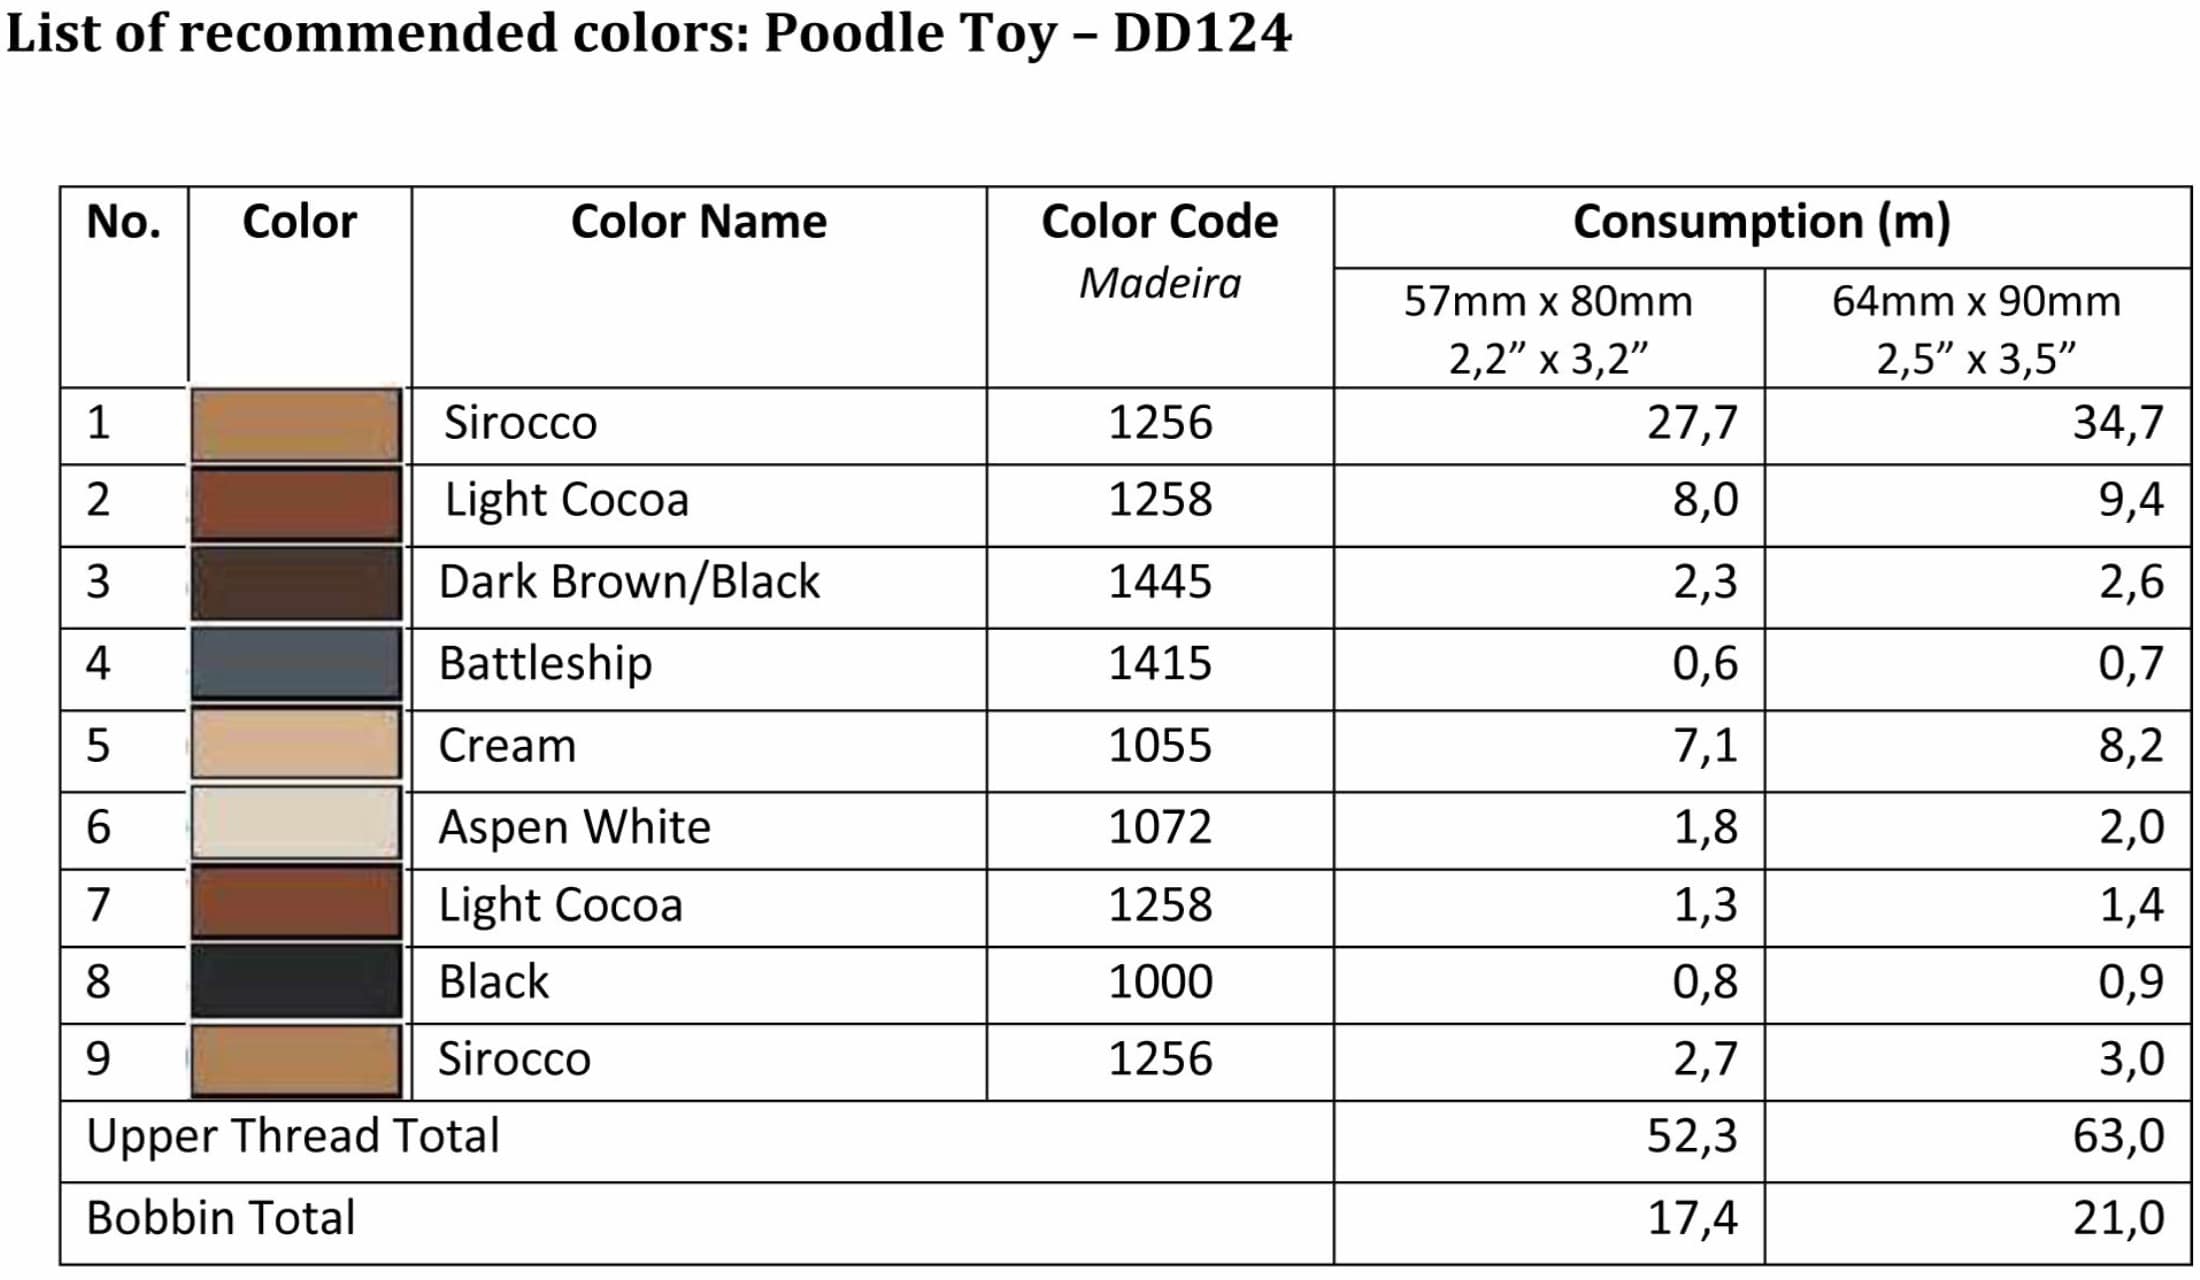 List of Recommended Colors -Poodle Toy DD124